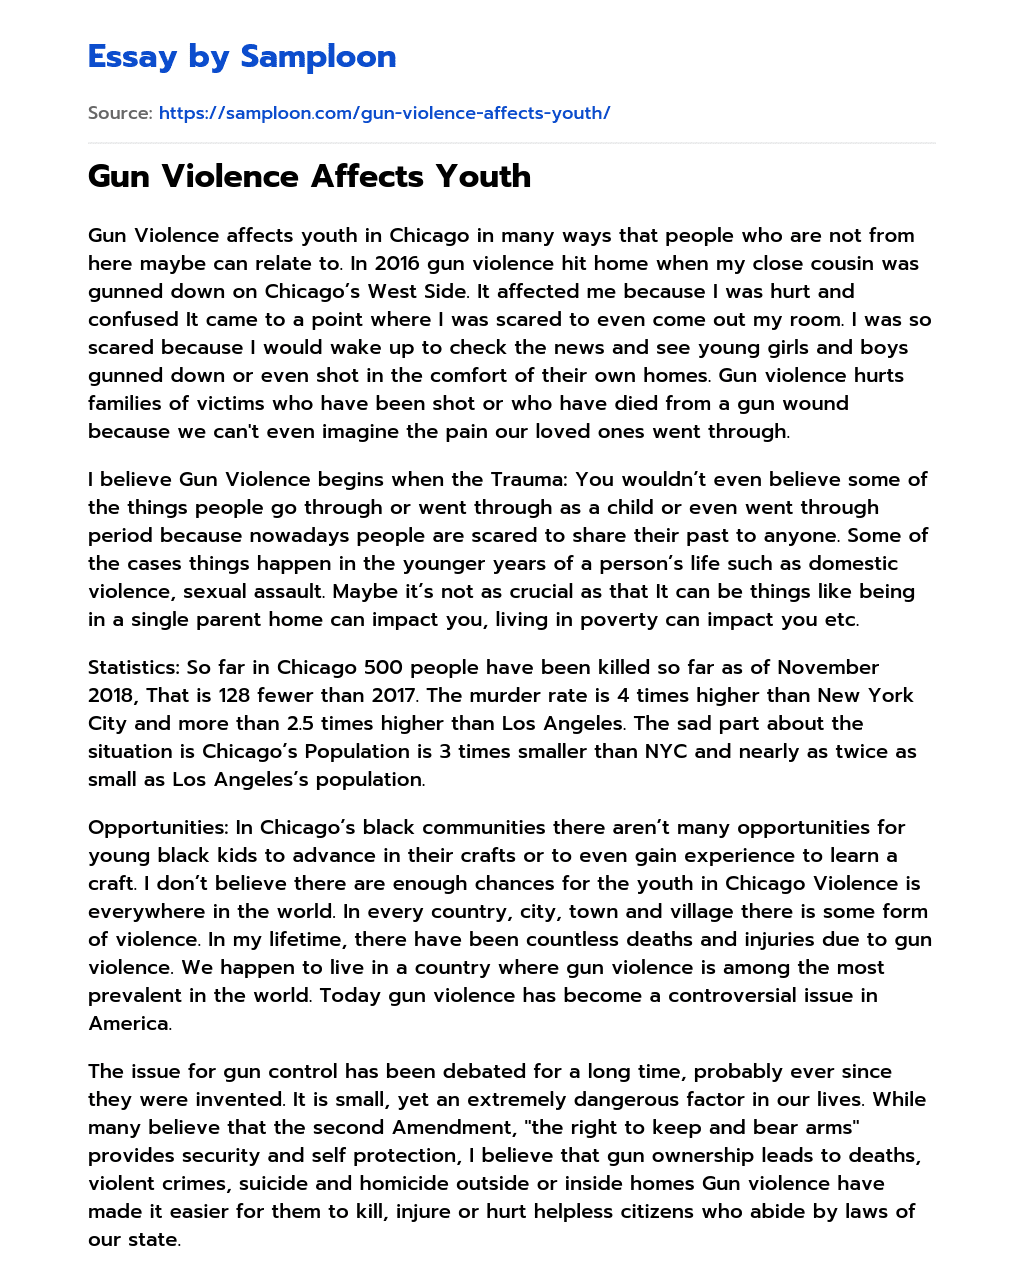 Gun Violence Affects Youth essay